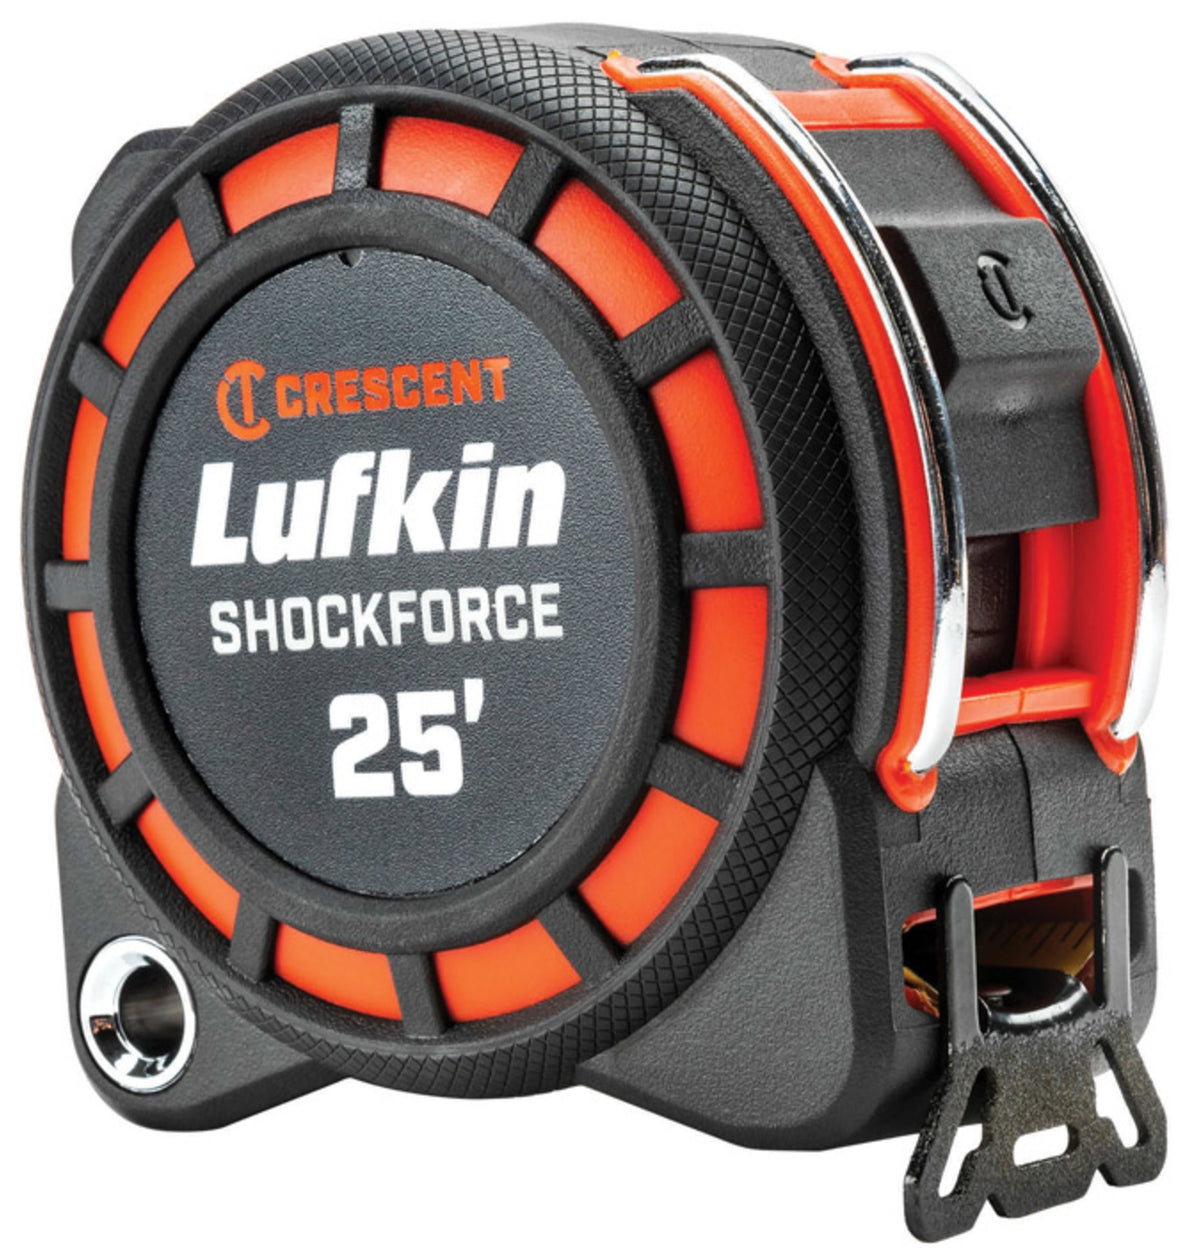 Buy lufkin l1125 - Online store for measuring tools, tape measures / tape rules in USA, on sale, low price, discount deals, coupon code